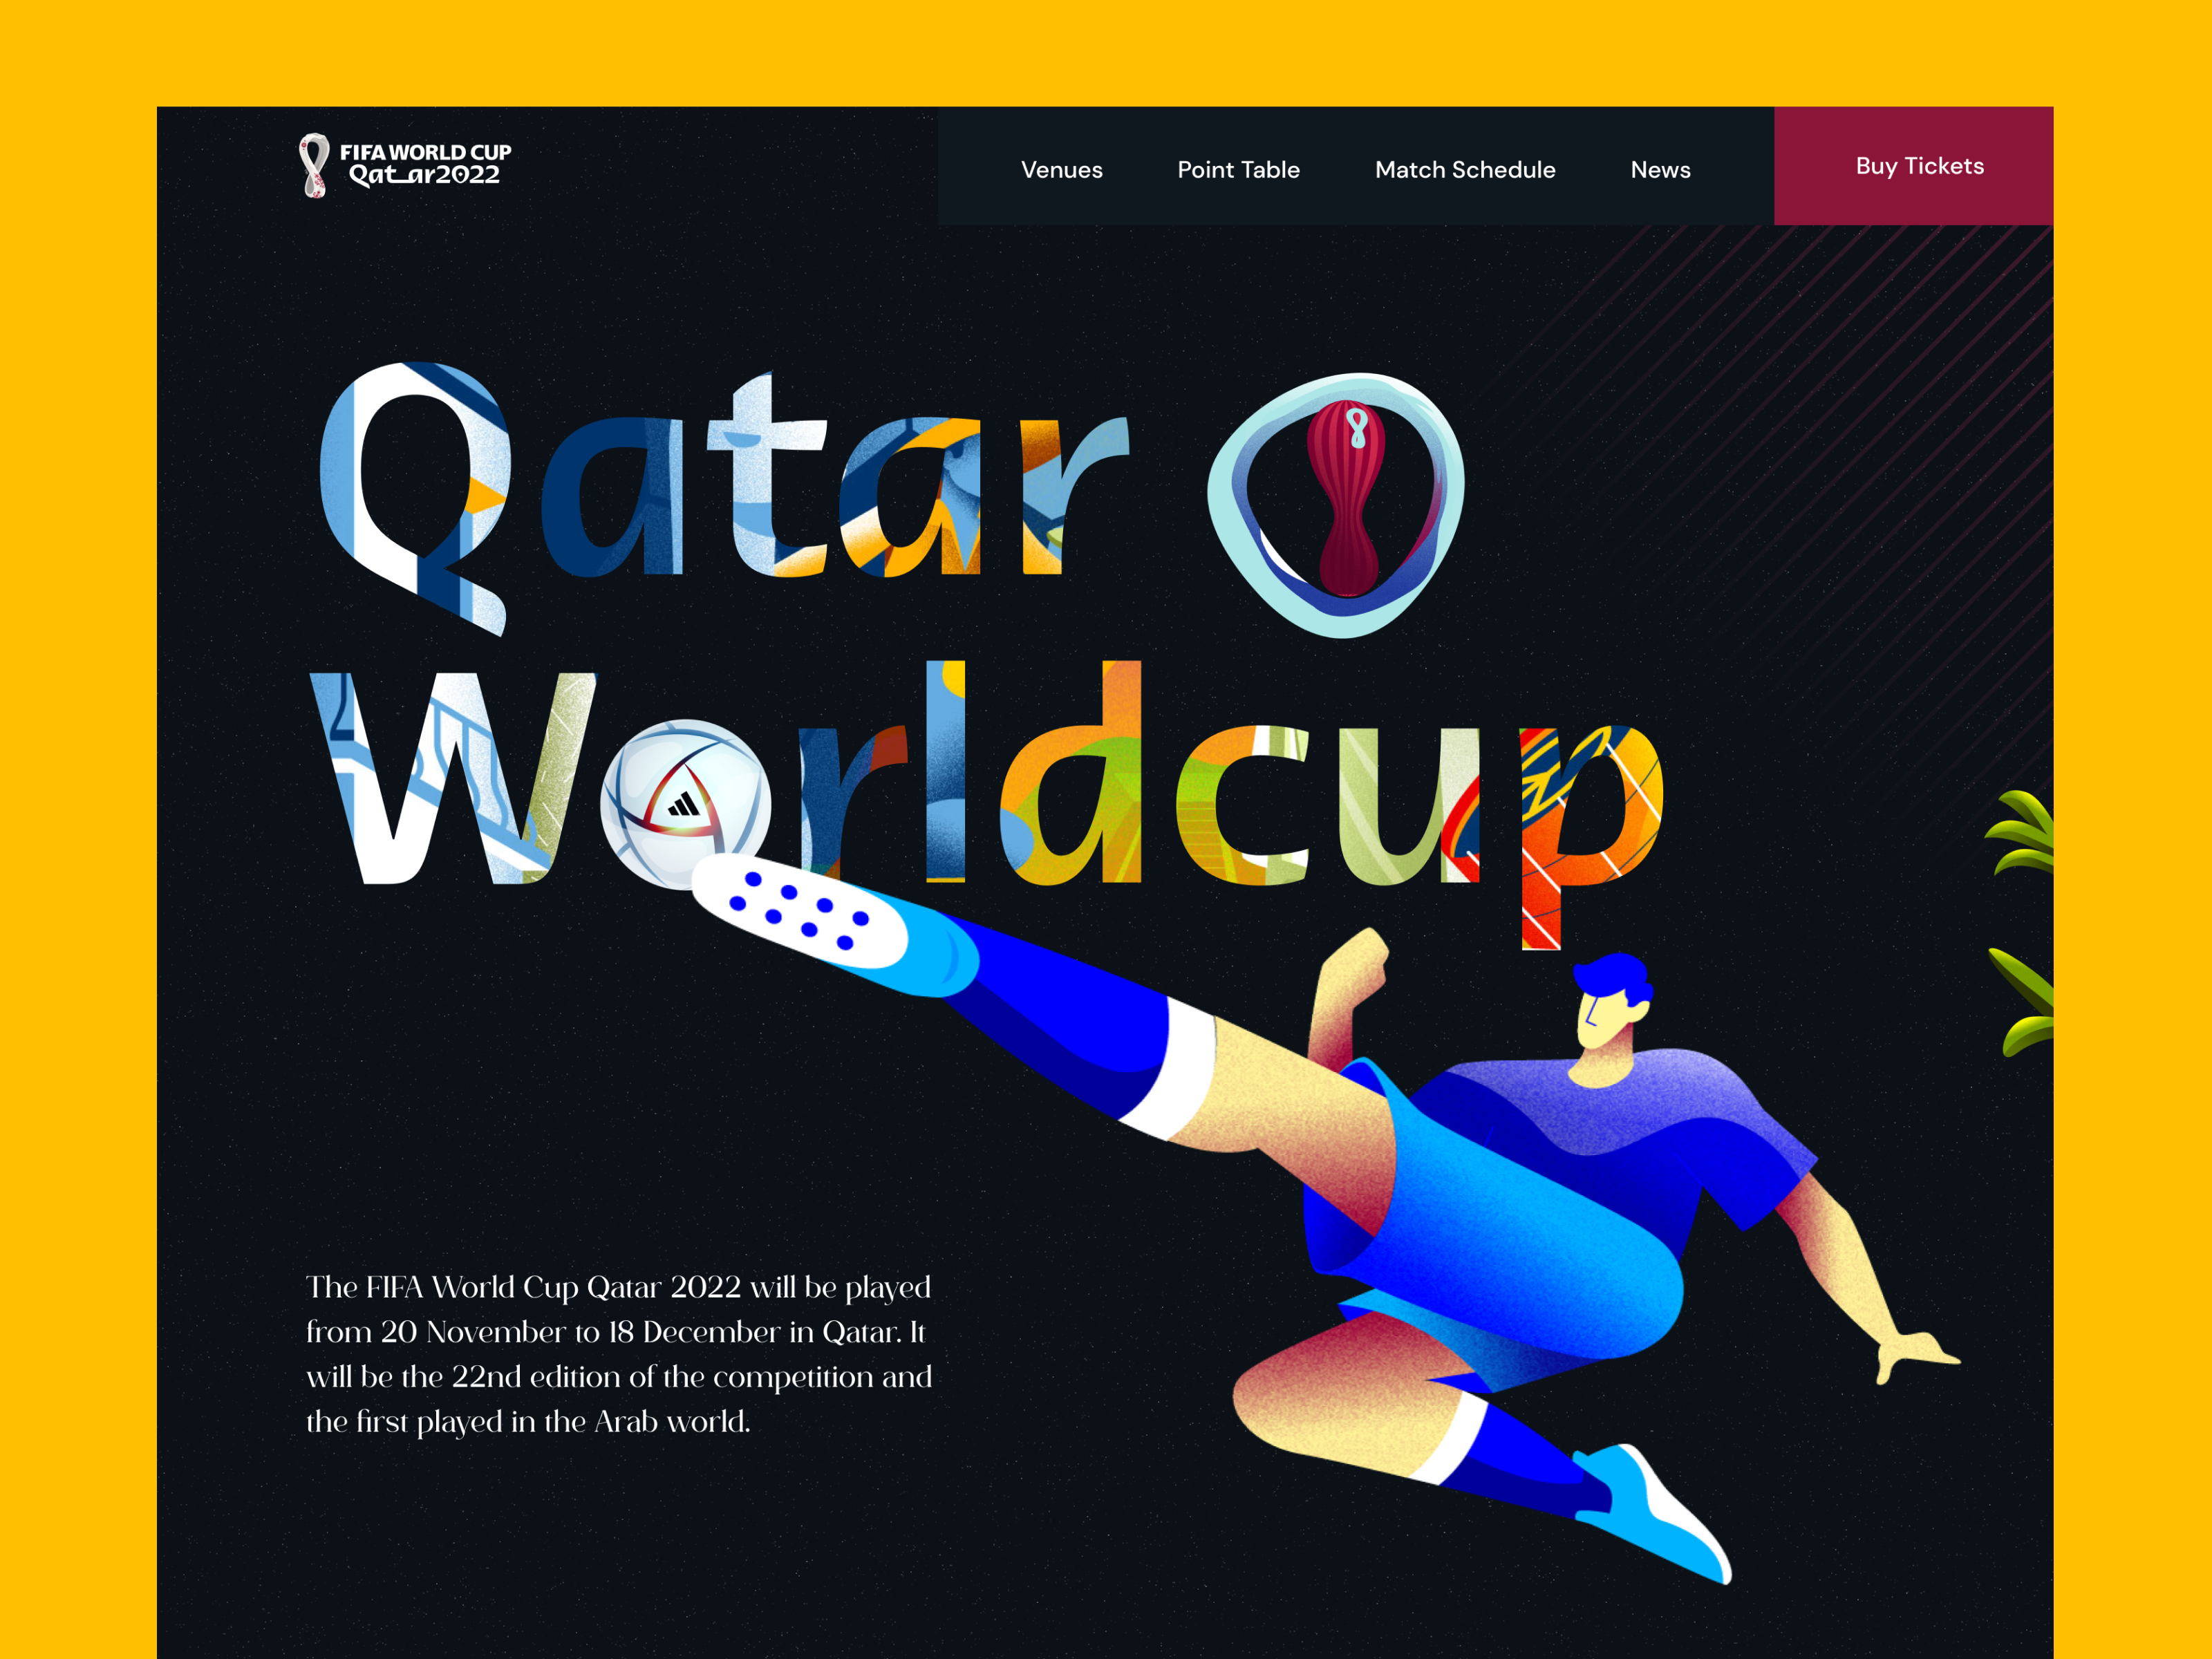 FIFA Worldcup Qatar 2022- Landing Page by Musemind UI/UX Agency on Dribbble